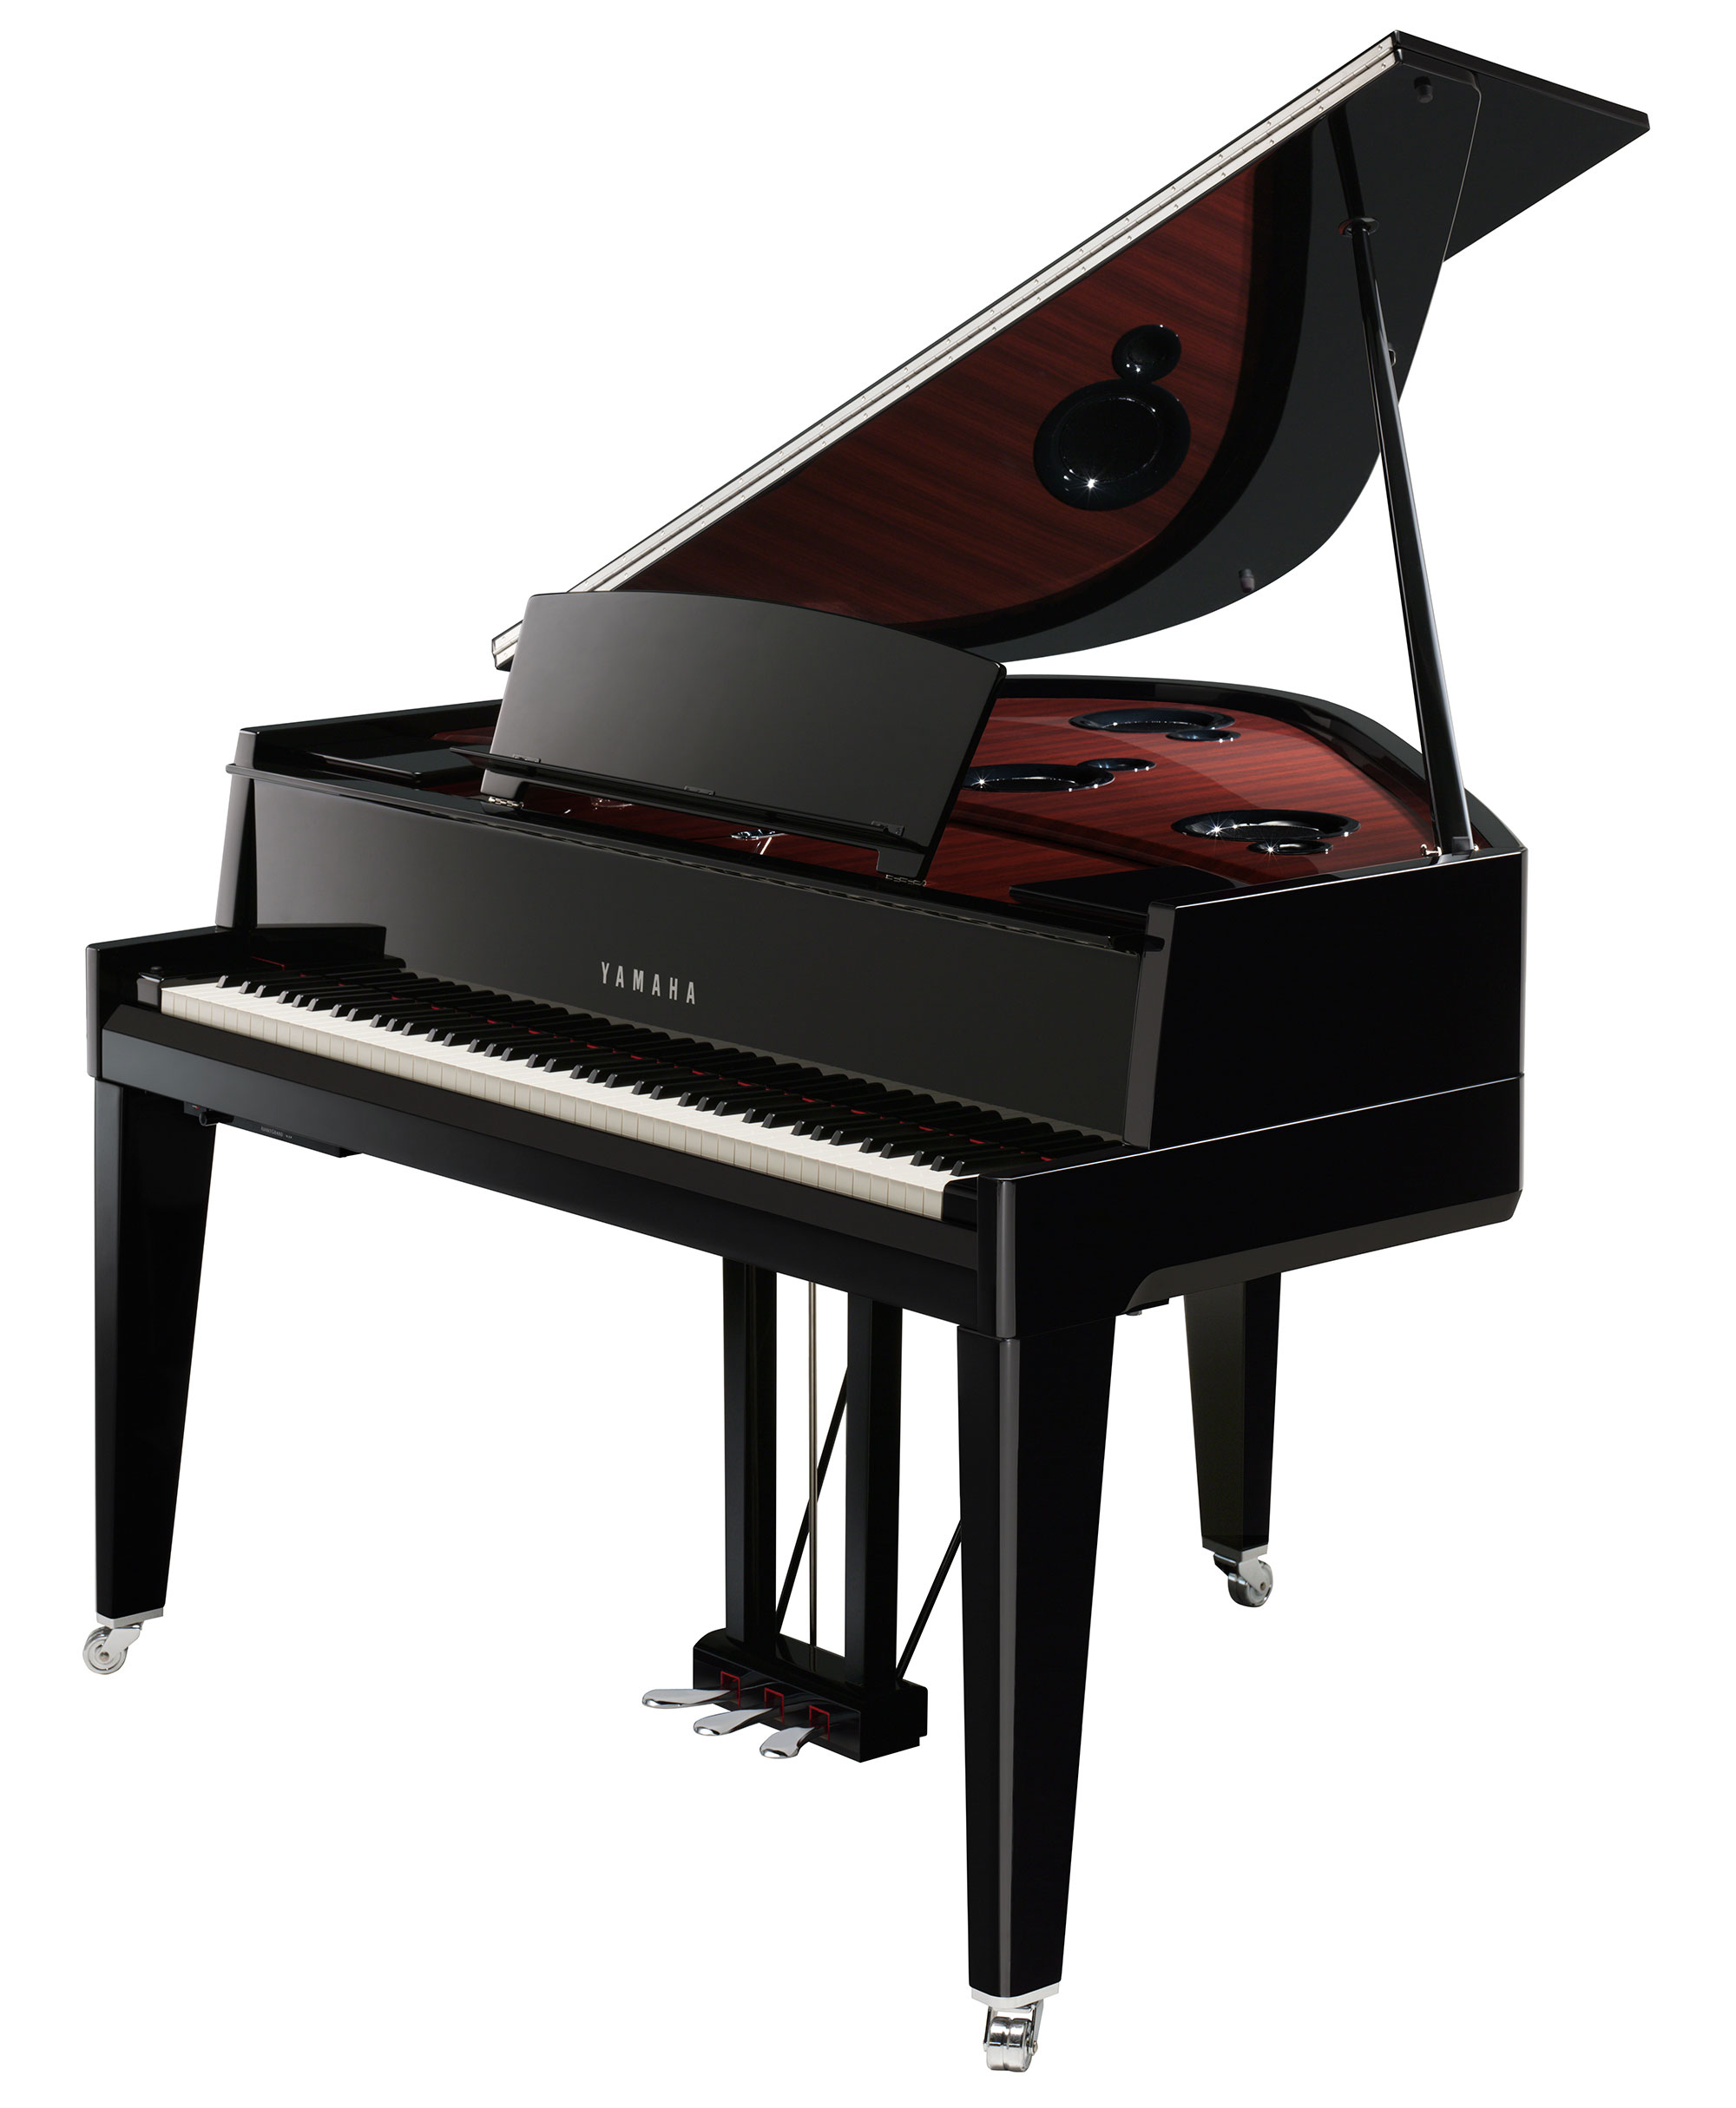 Yamaha N3x - LaquÉ Noir - Digital piano with stand - Variation 1